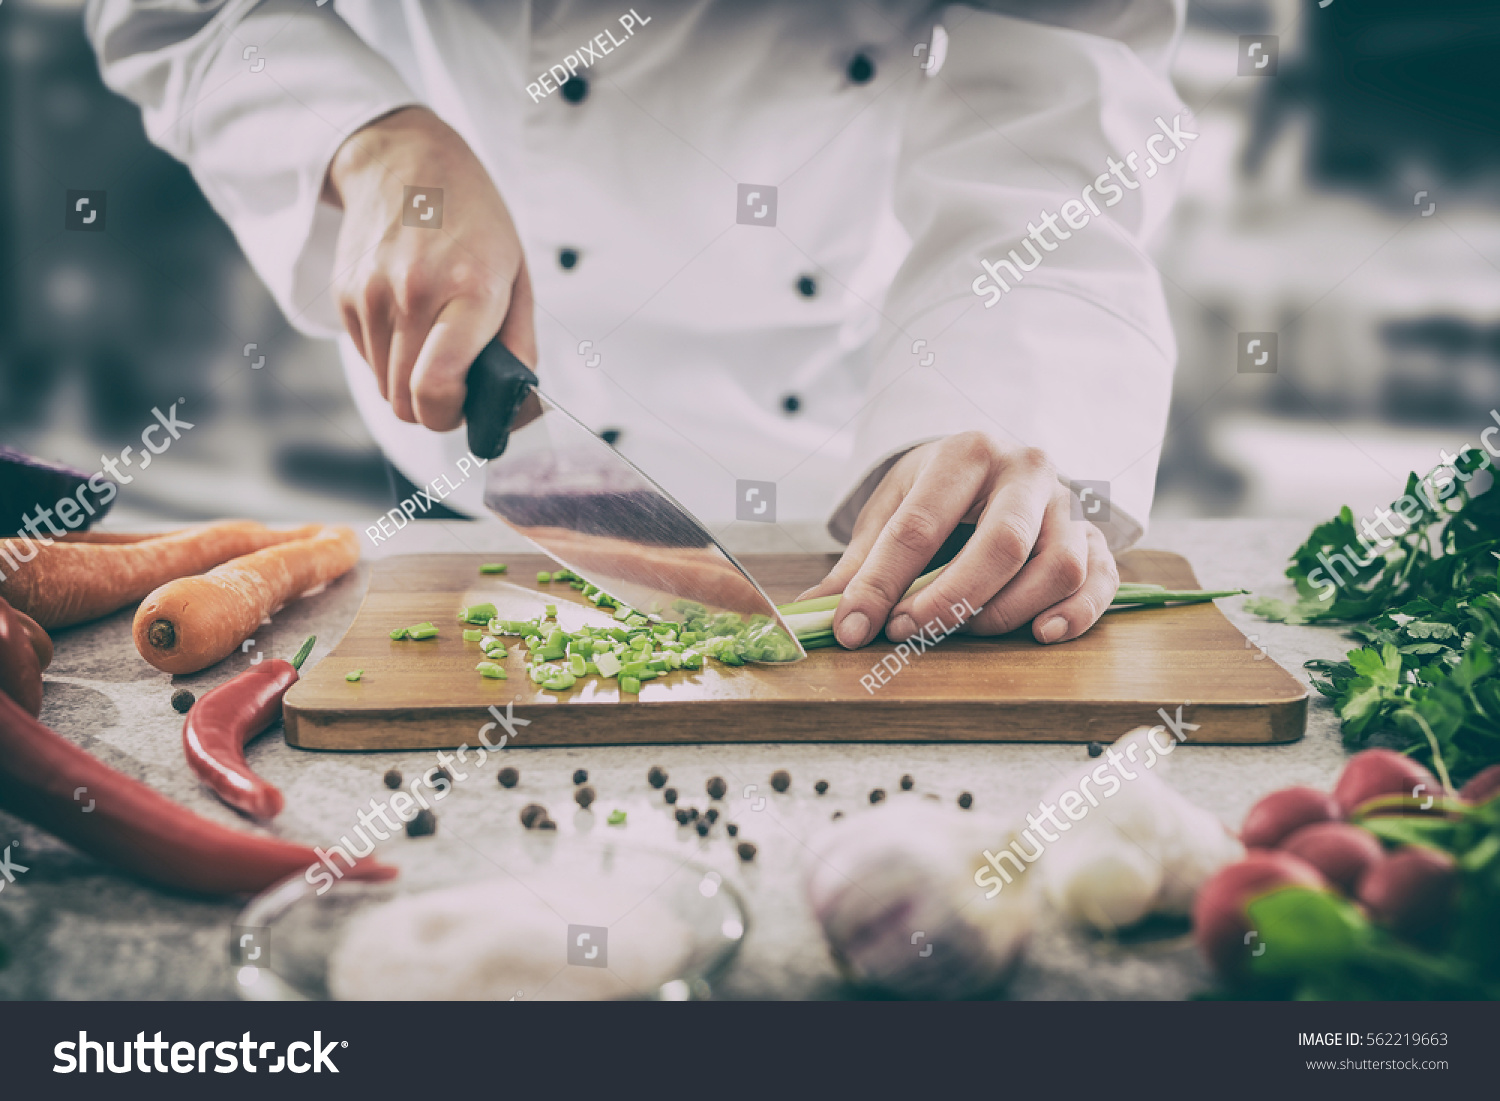 chef cooking food kitchen restaurant cutting cook hands hotel man male knife preparation fresh preparing concept - stock image #562219663